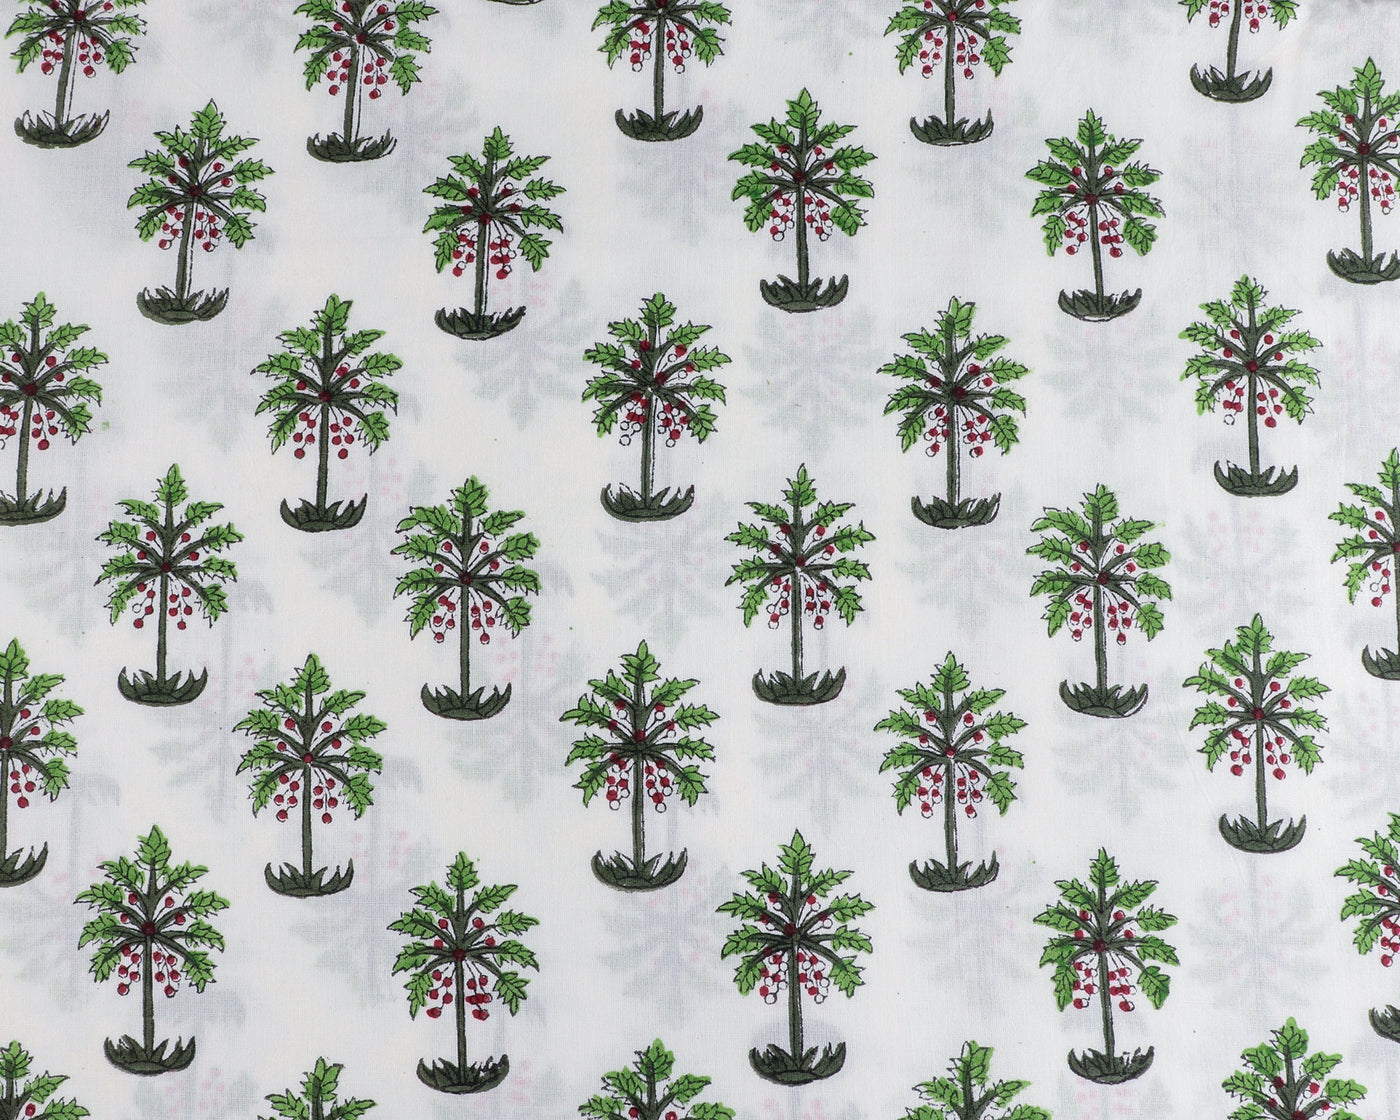 Fabricrush Grass Green, Dark Green and Burgundy Red Indian Hand Block Palm Tree Printed 100% Pure Cotton Cloth, Fabric by the yard, Women's Clothing